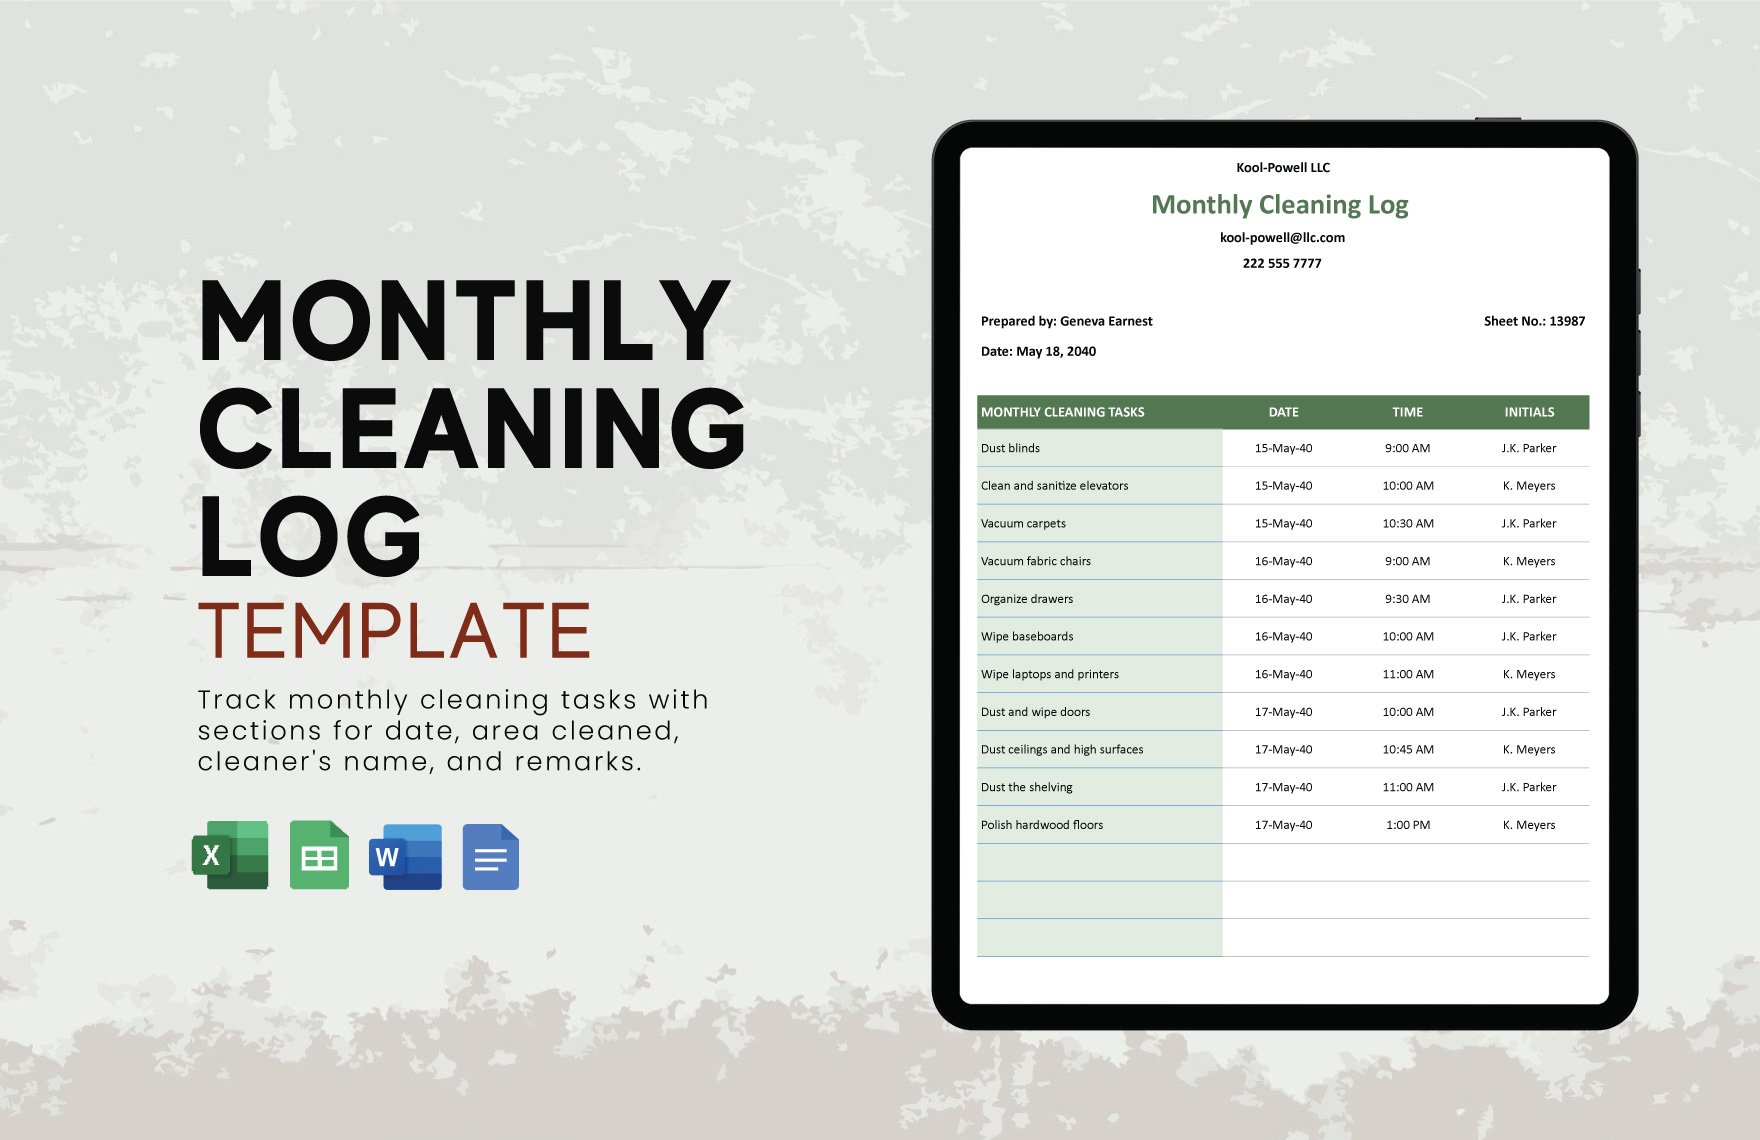 Monthly Cleaning Log Template in Word, Google Docs, Excel, Google Sheets